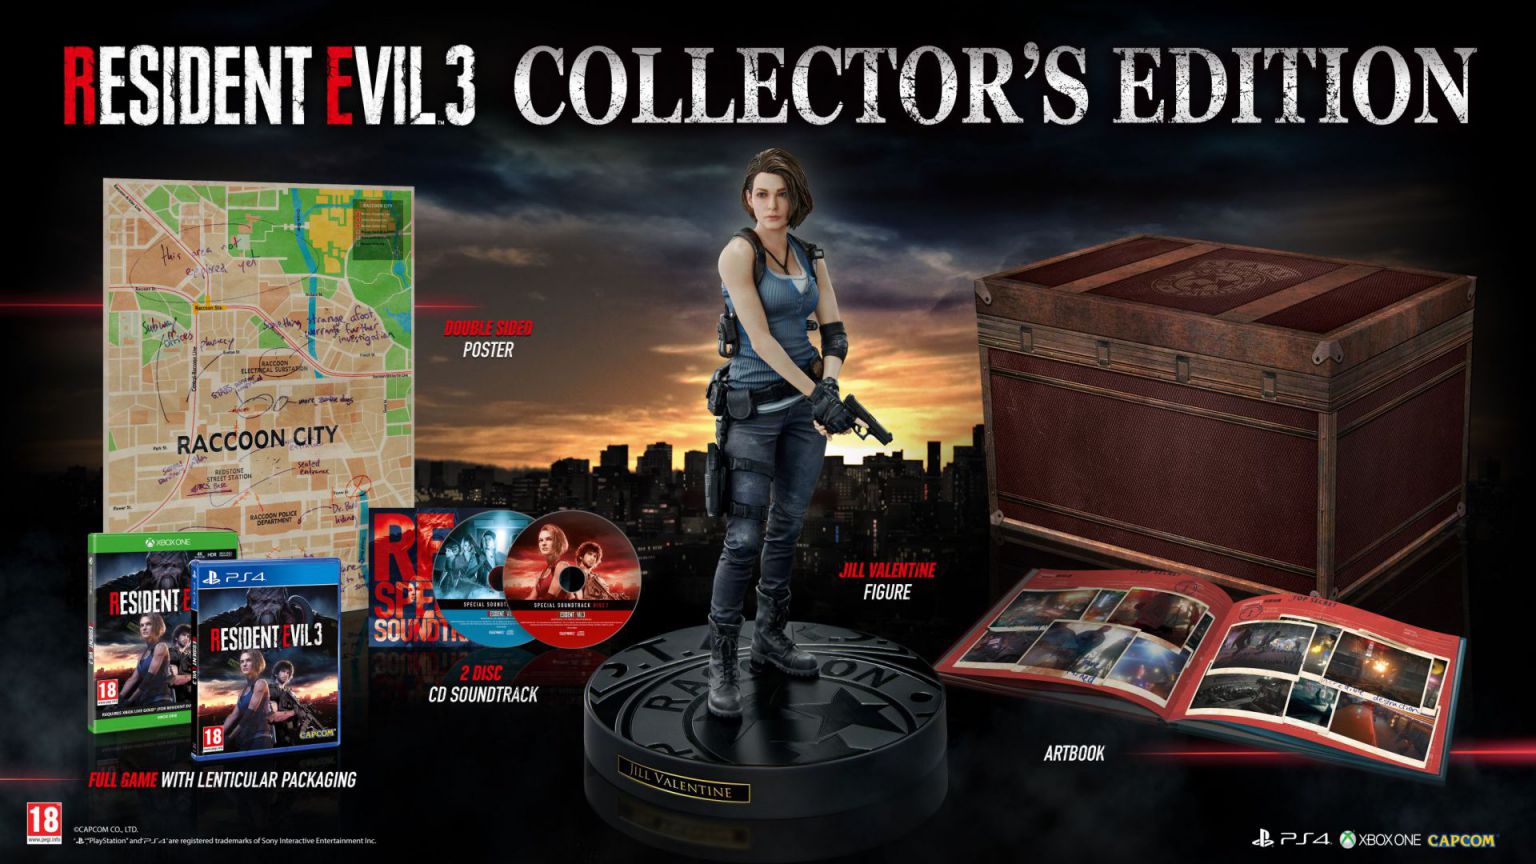 Resident Evil 3 Collectors